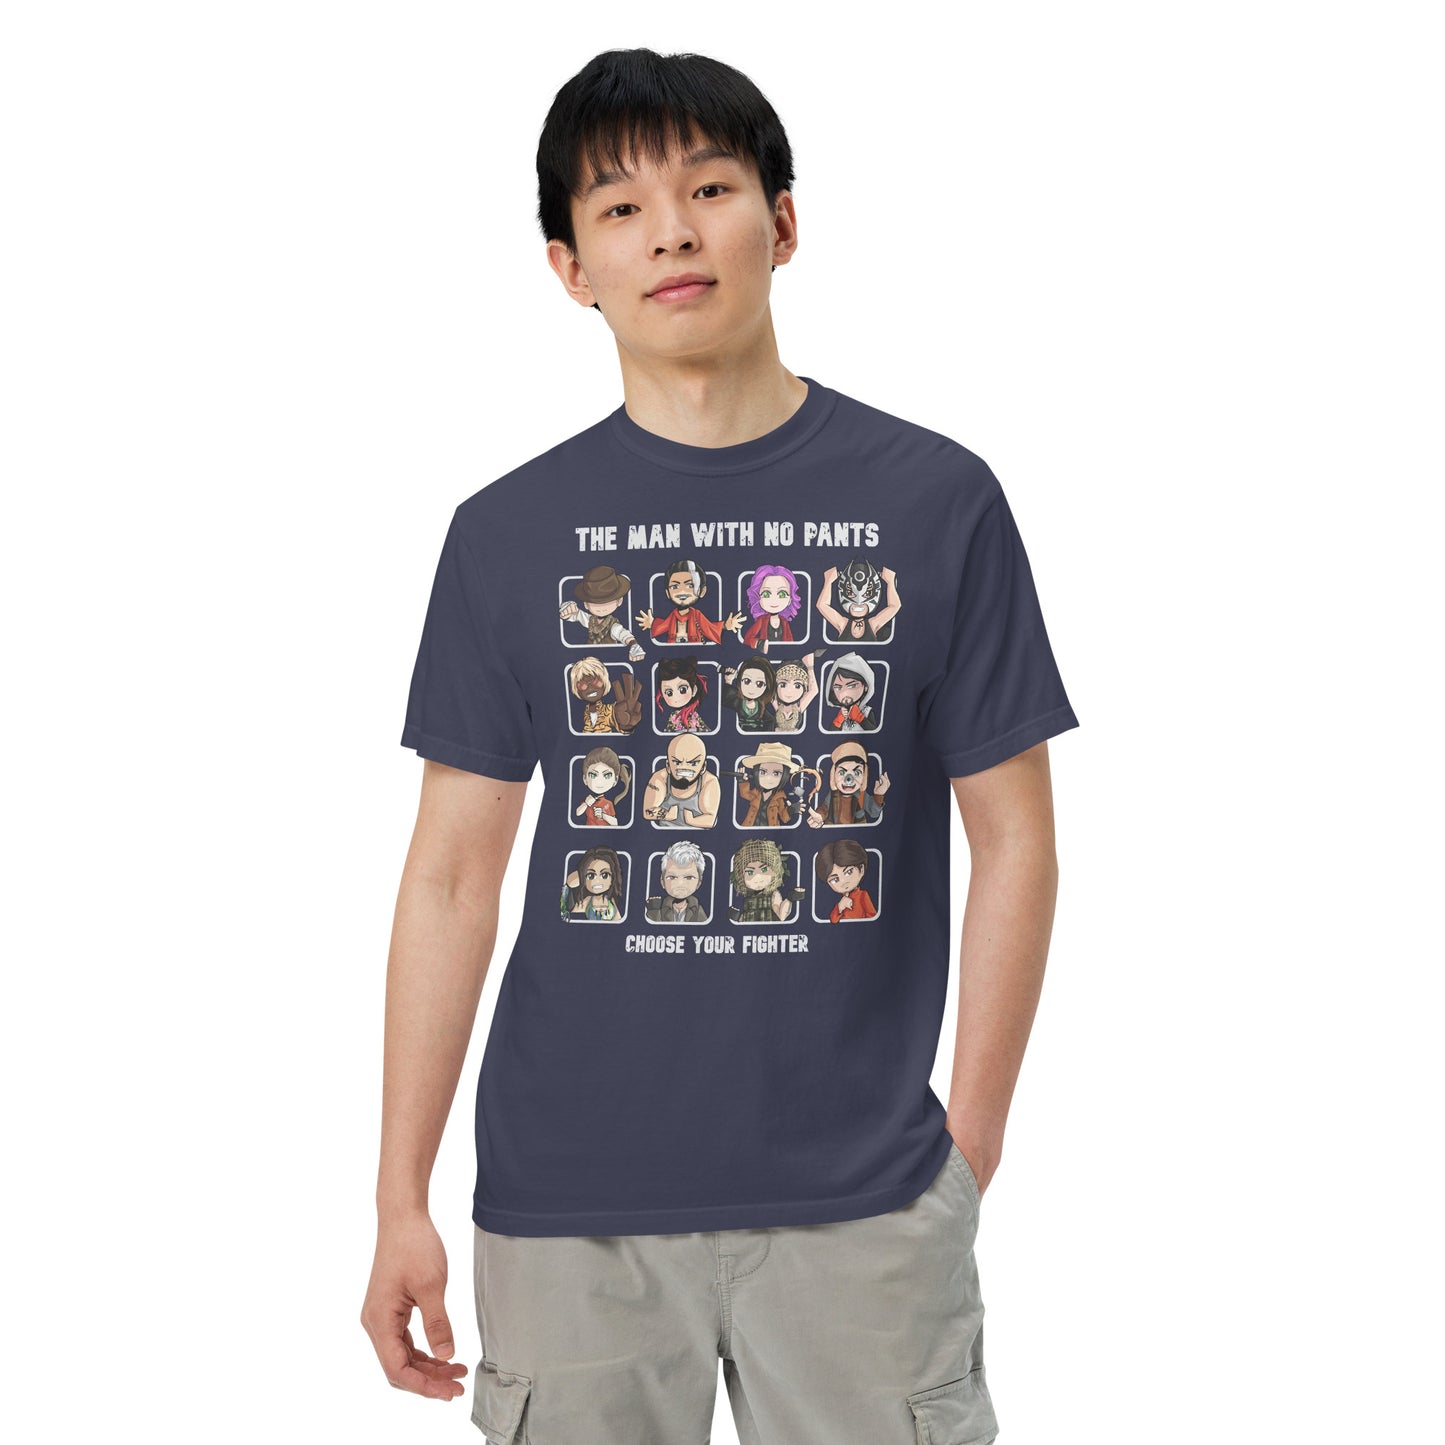 The Man With No Pants Fighter T-Shirt